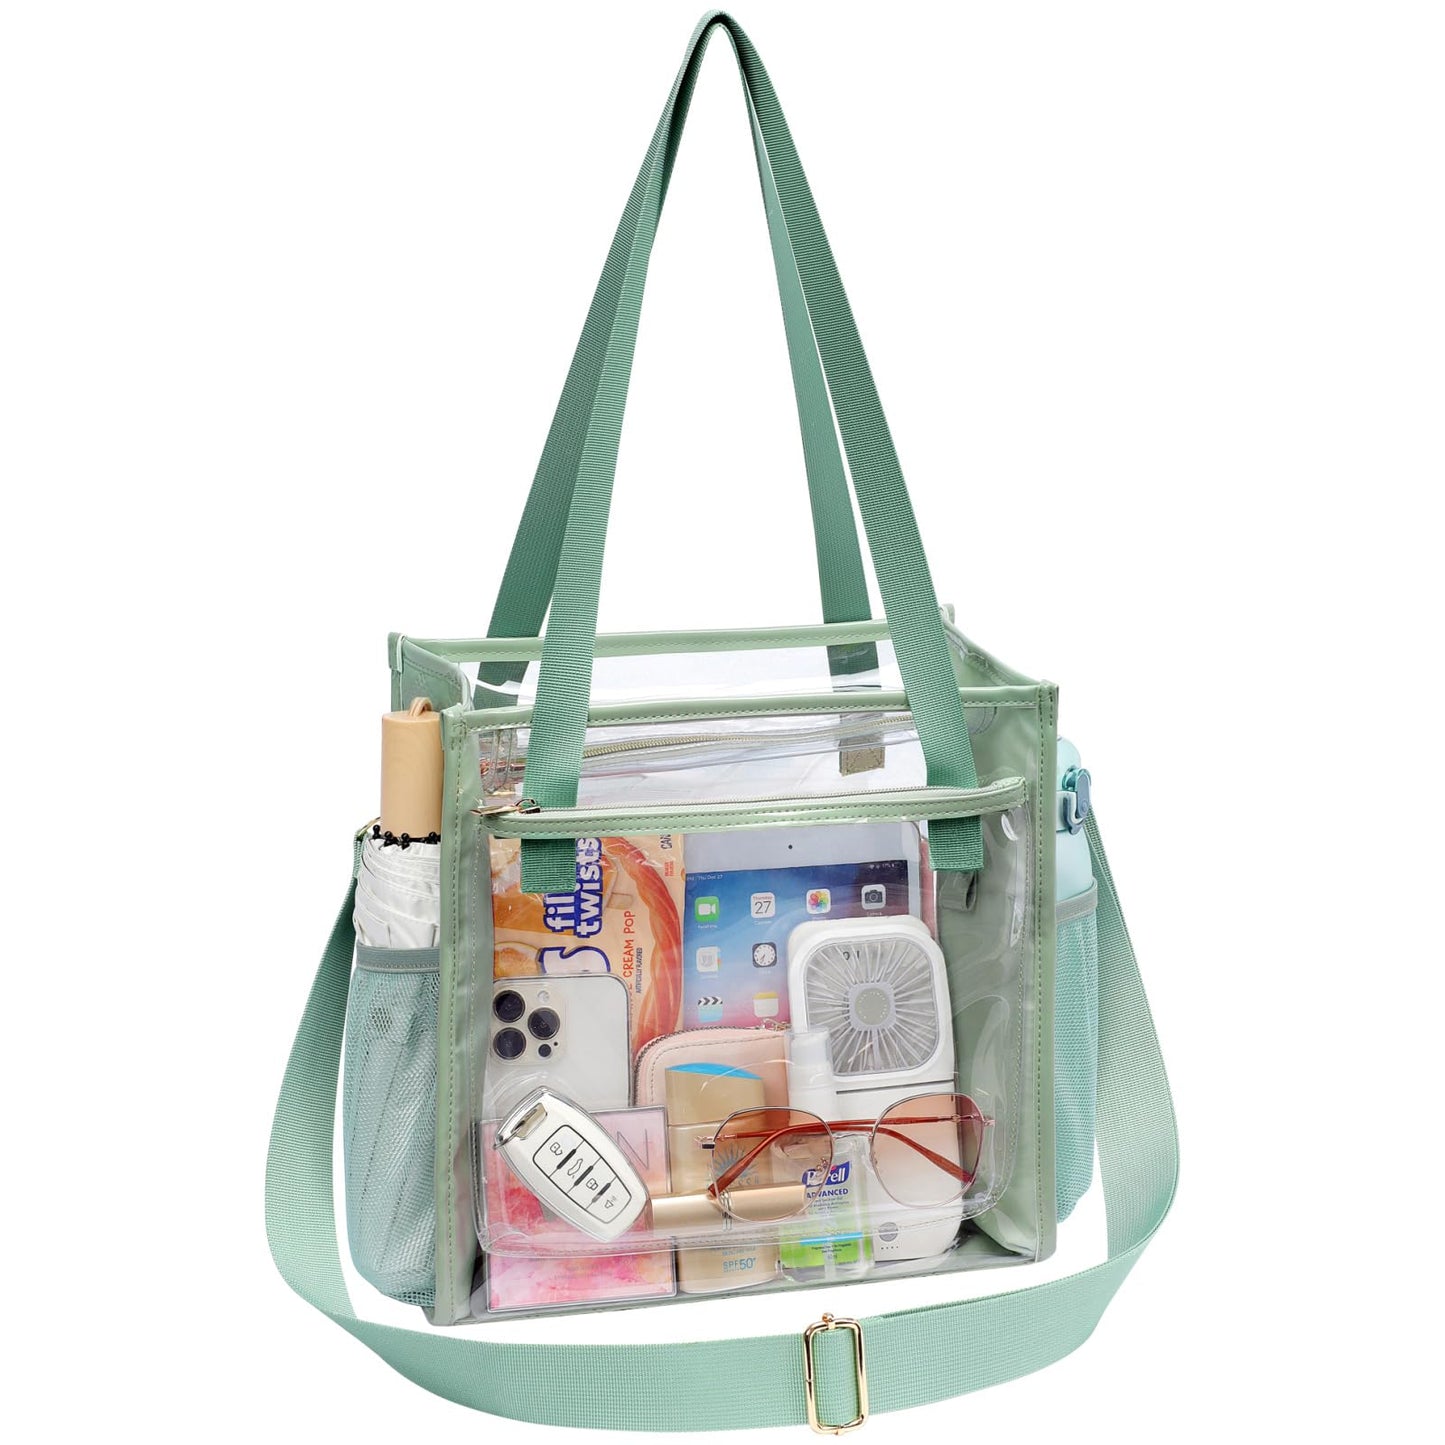 PACKISM Holographic Clear Tote Bag Stadium Approved for Women